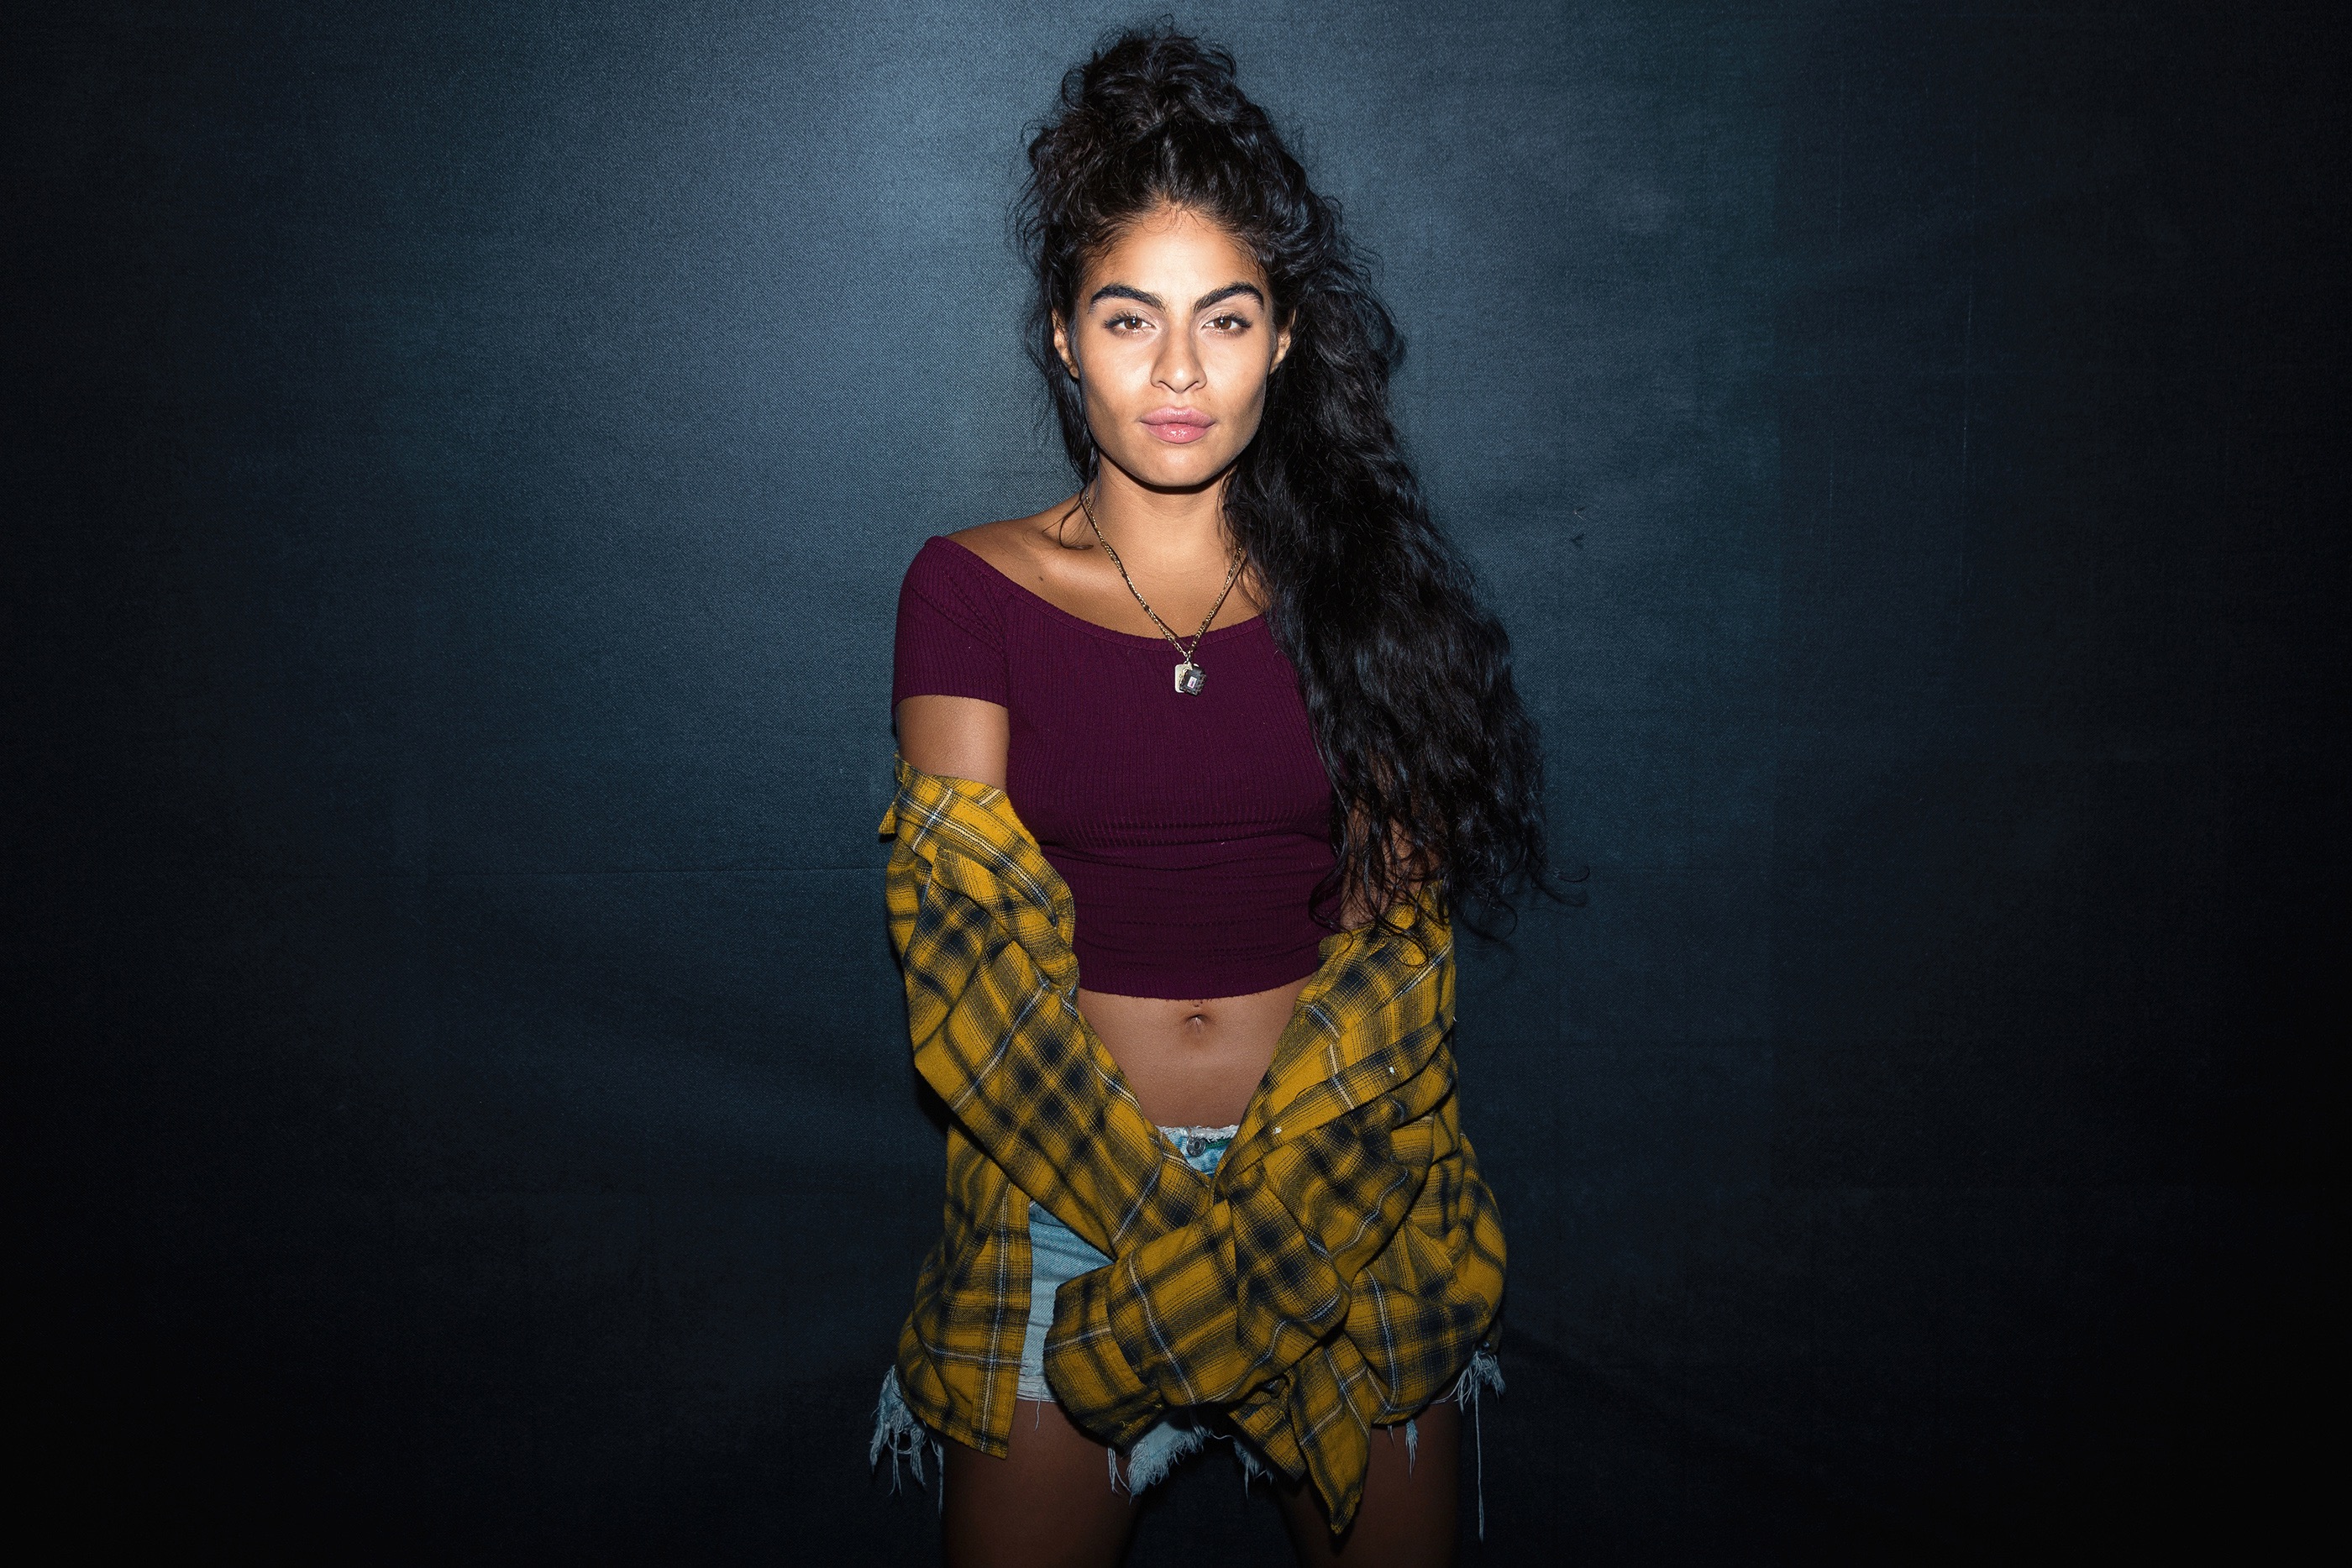 Columbian-Canadian Jessie Reyez Is an Artist You Need to Know